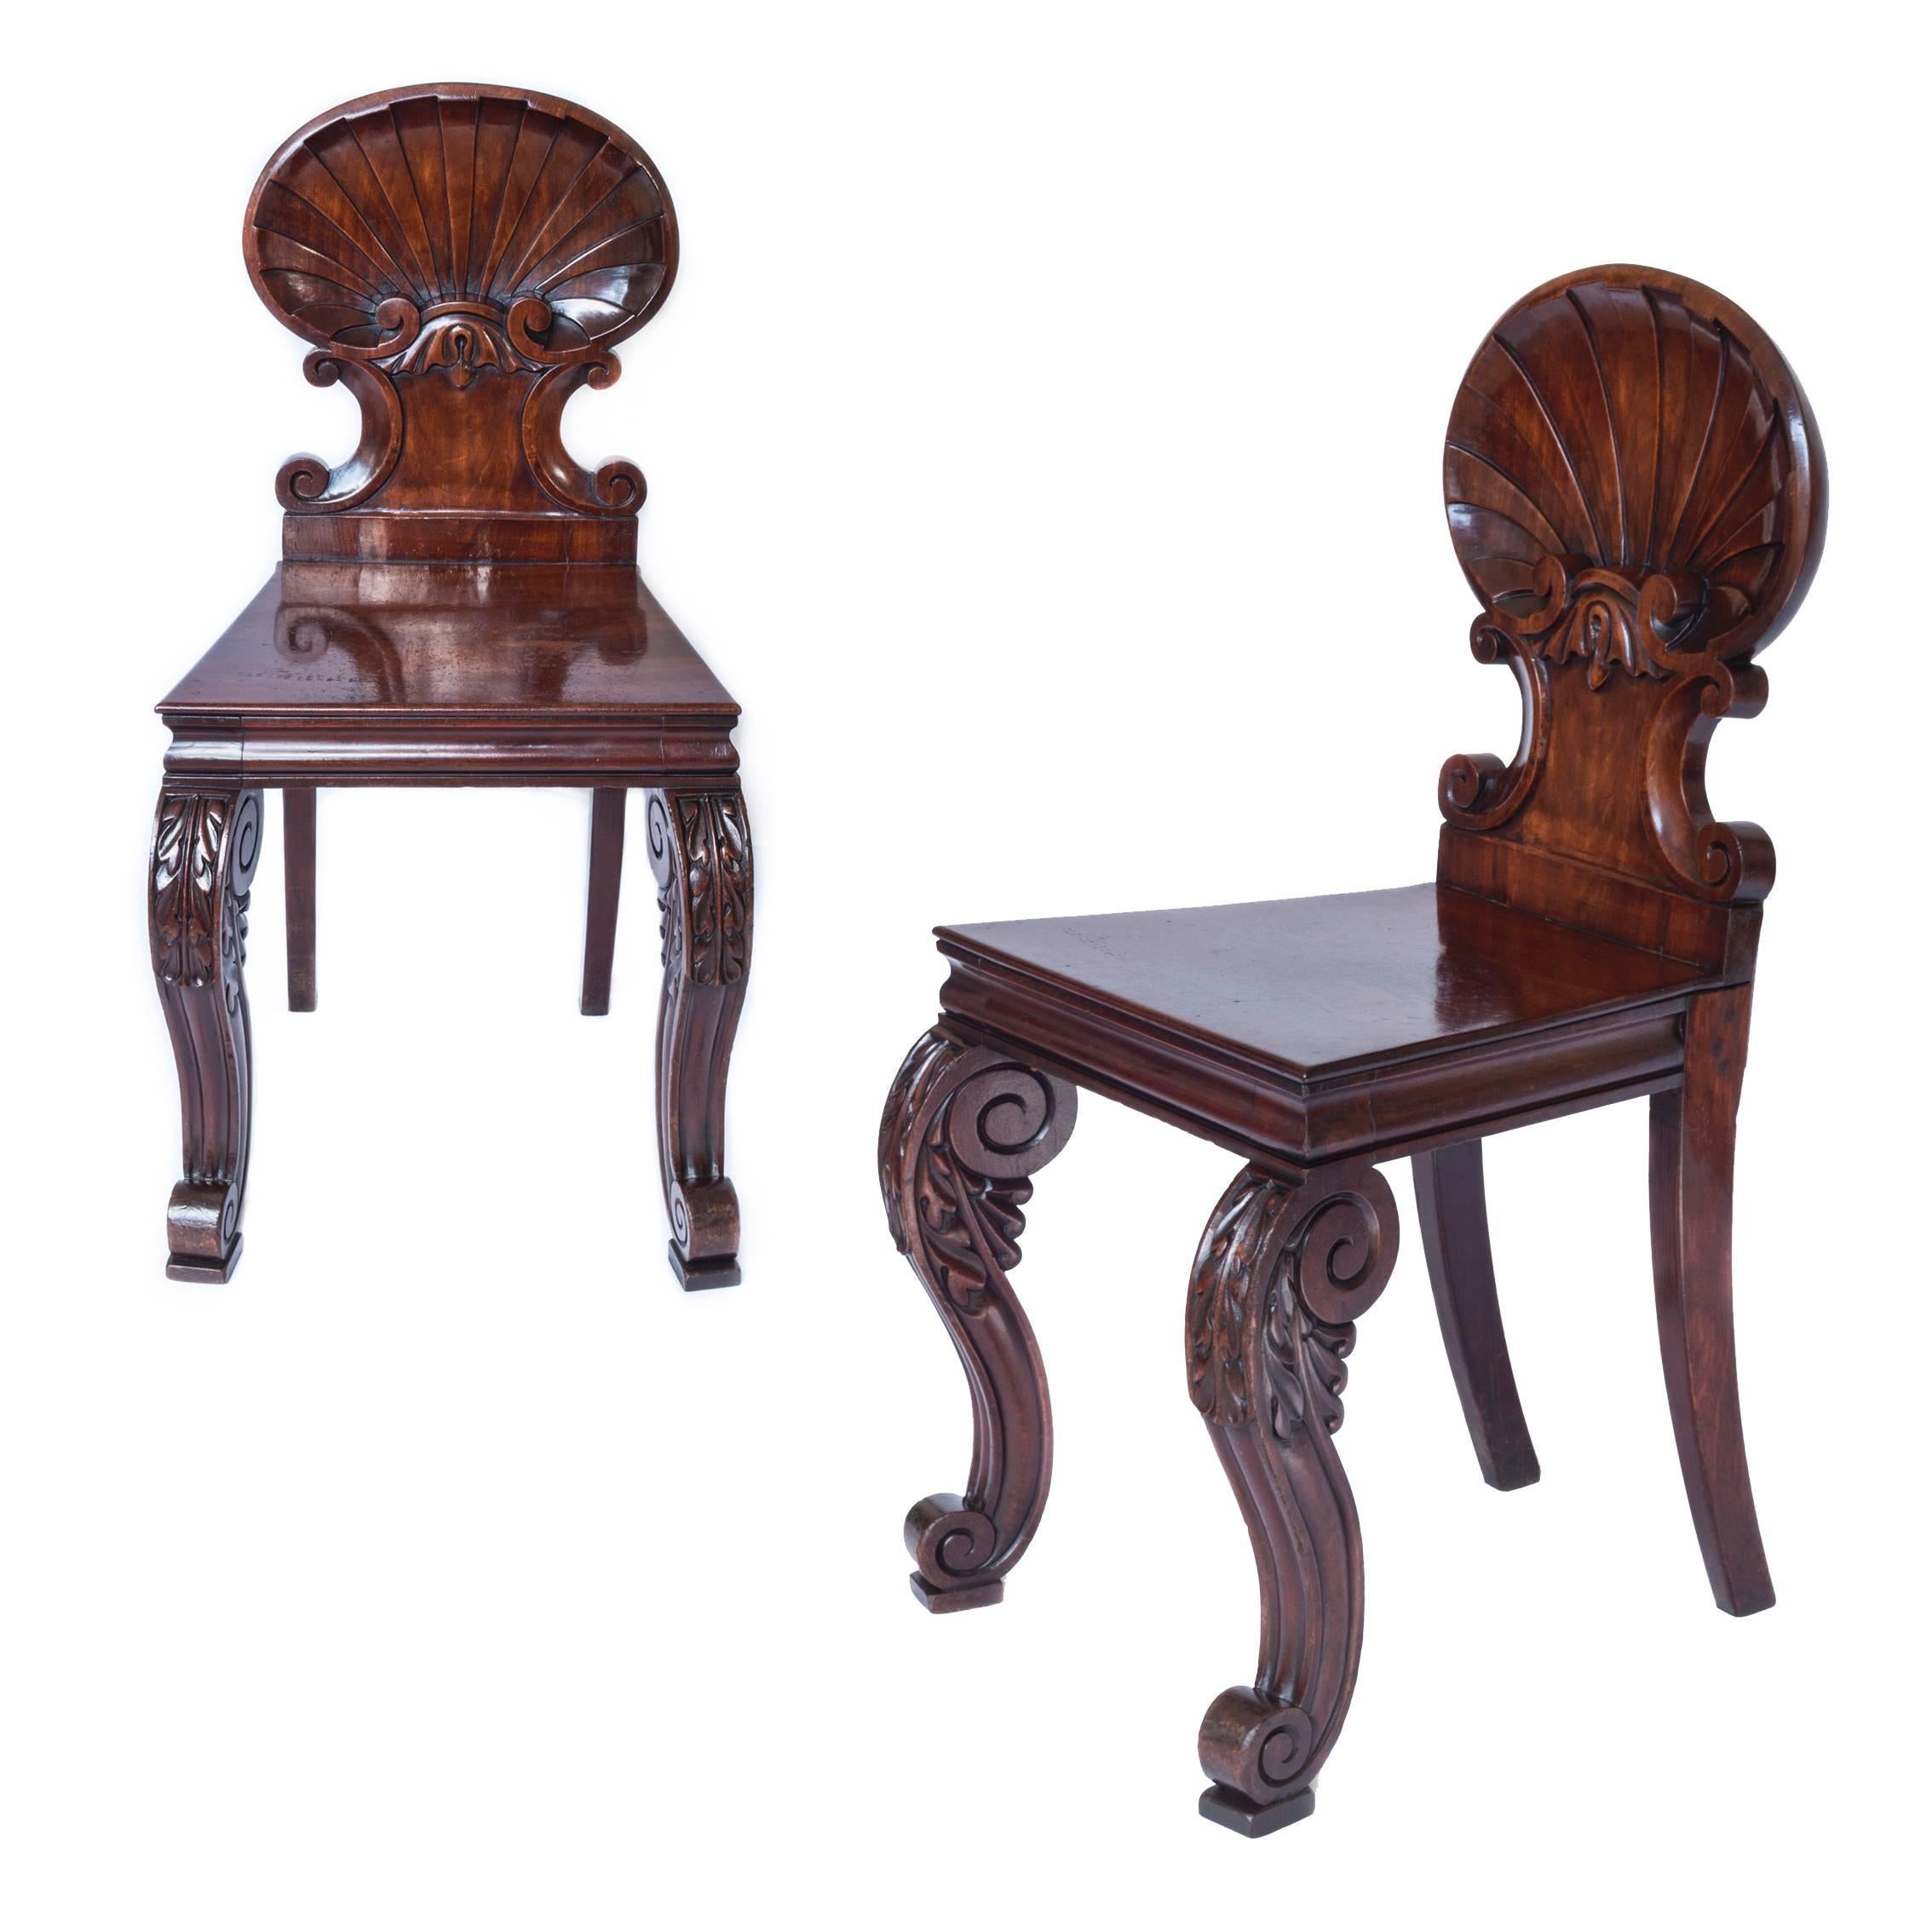 Rare and unusual pair of late Regency - William IV period mahogany hall chairs, in the Kentian baroque-revival taste, after a design by Gillows of Lancaster and London.

Possibly Irish, c. 1835.

Each chair having the scalloped shell carved back,